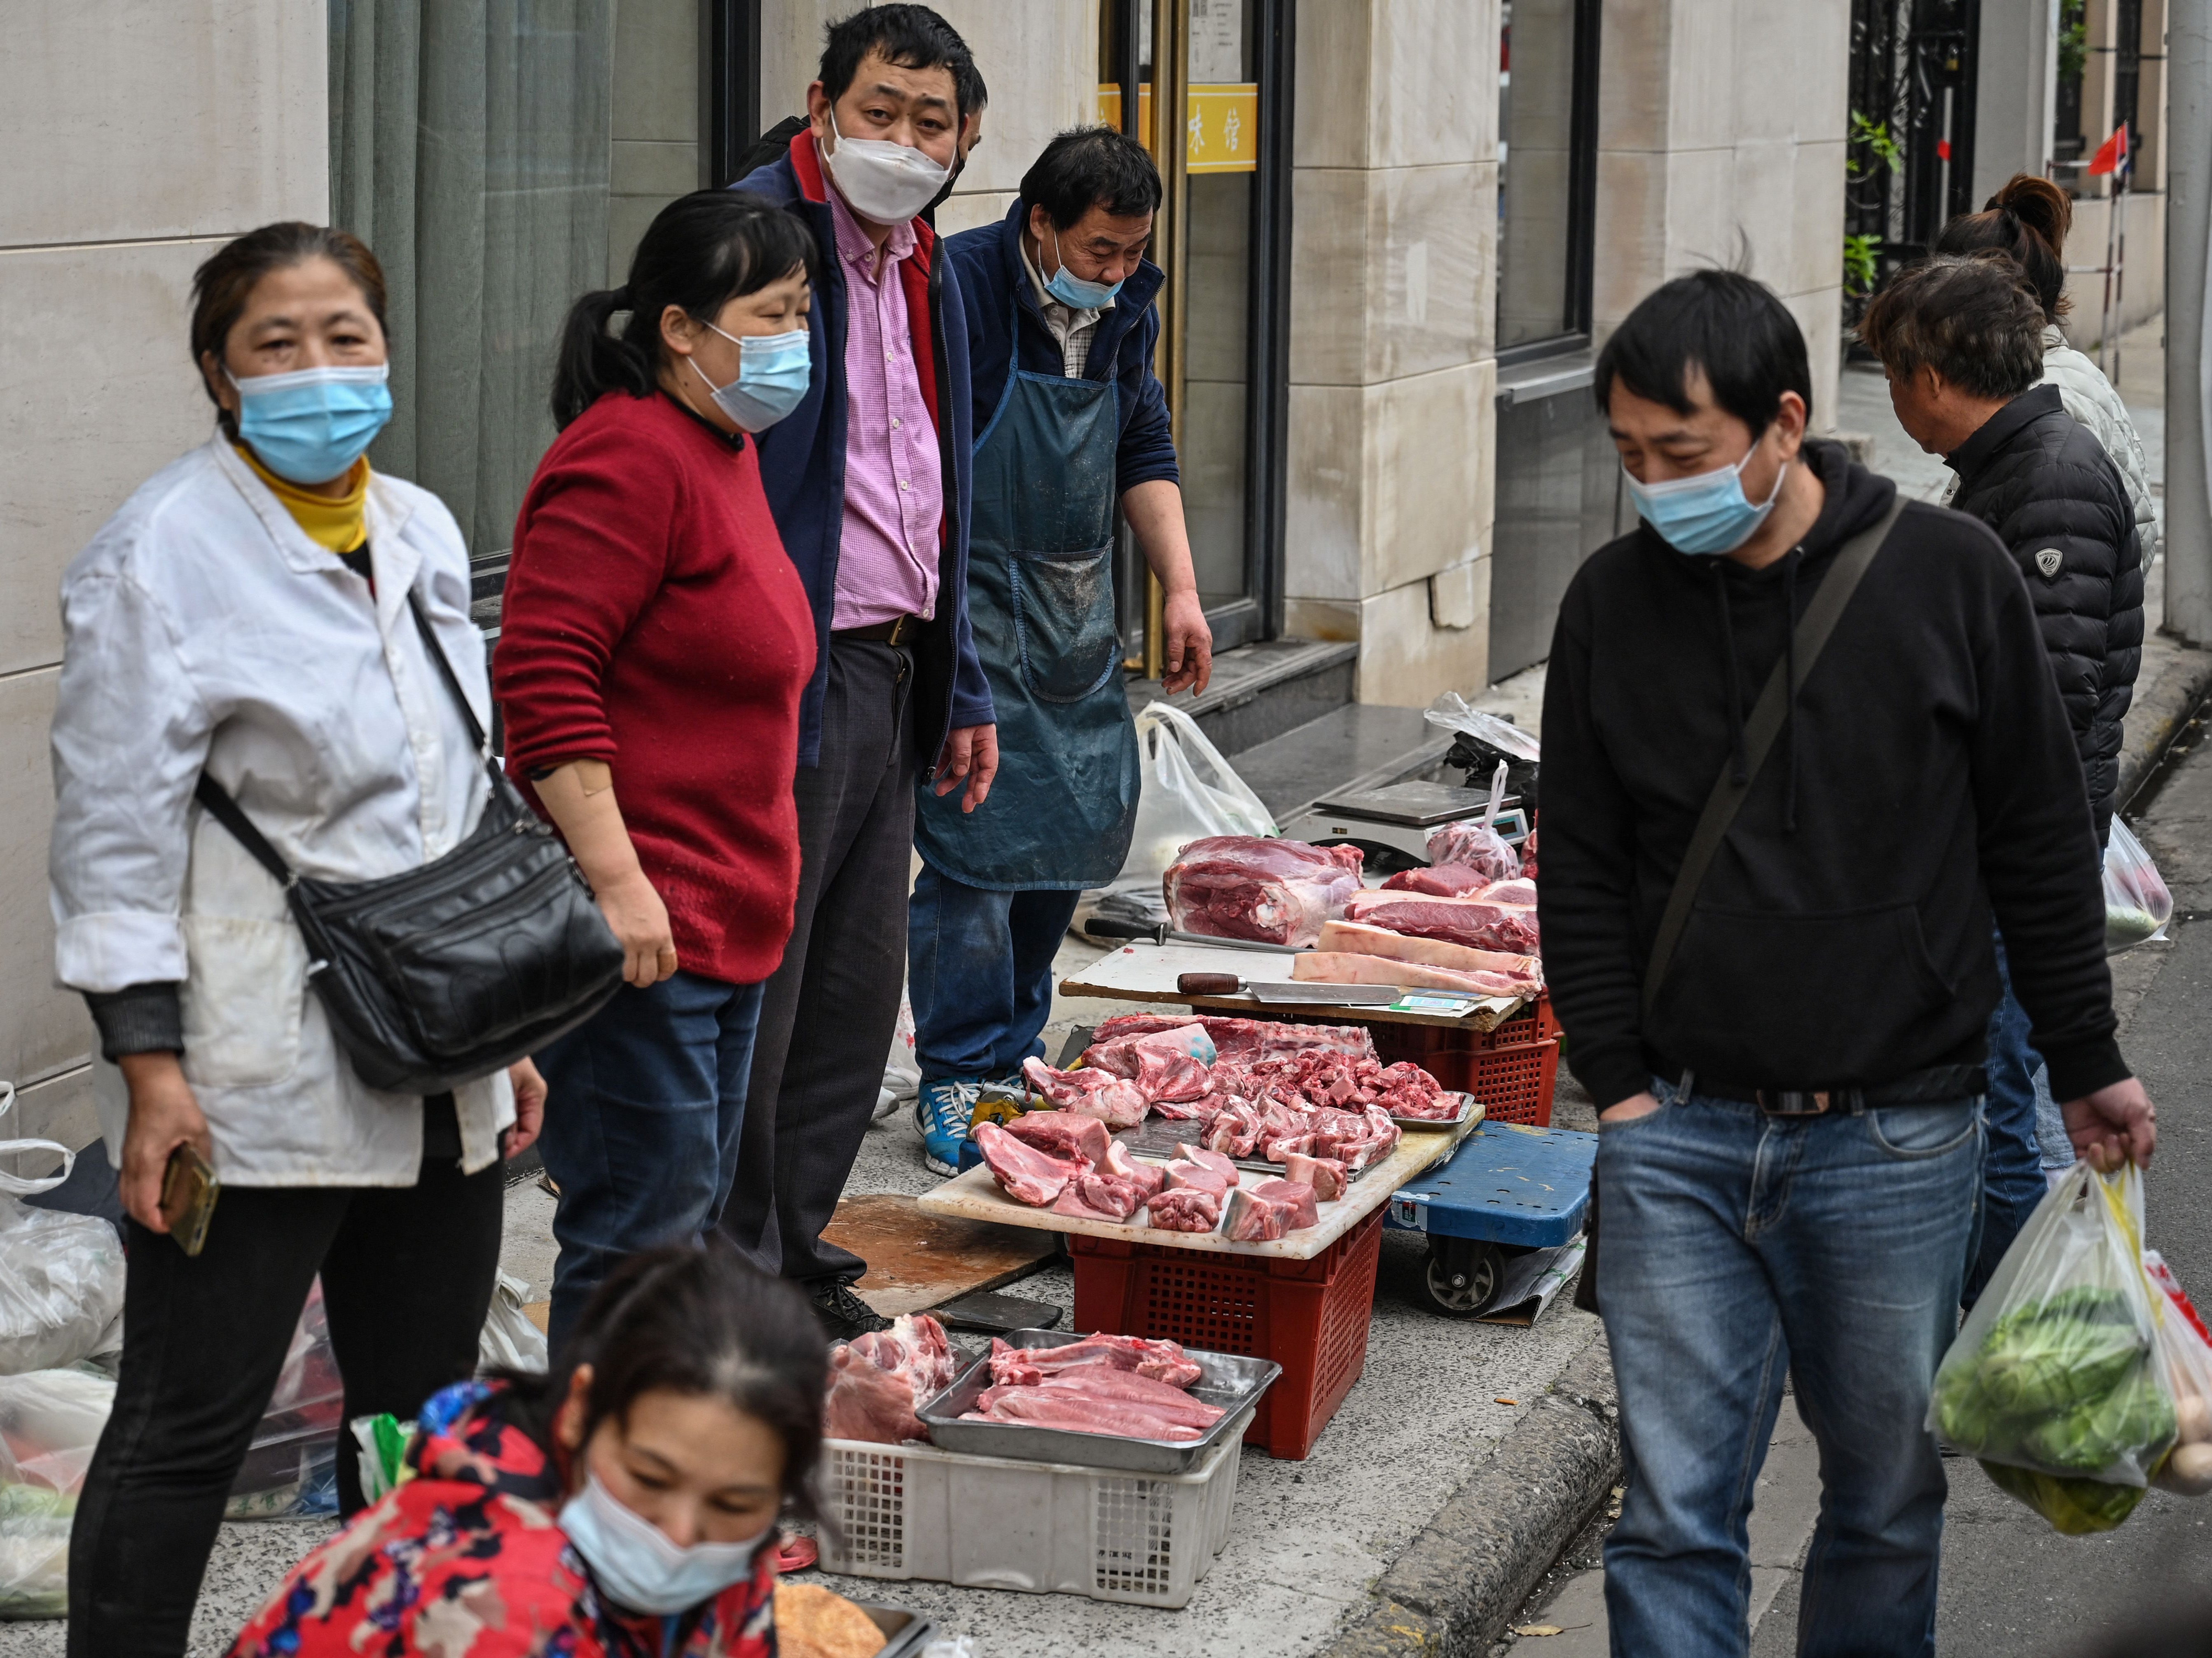 Vendors sell meat in front of a local market in Shanghai’s Jing’an district on 31 March